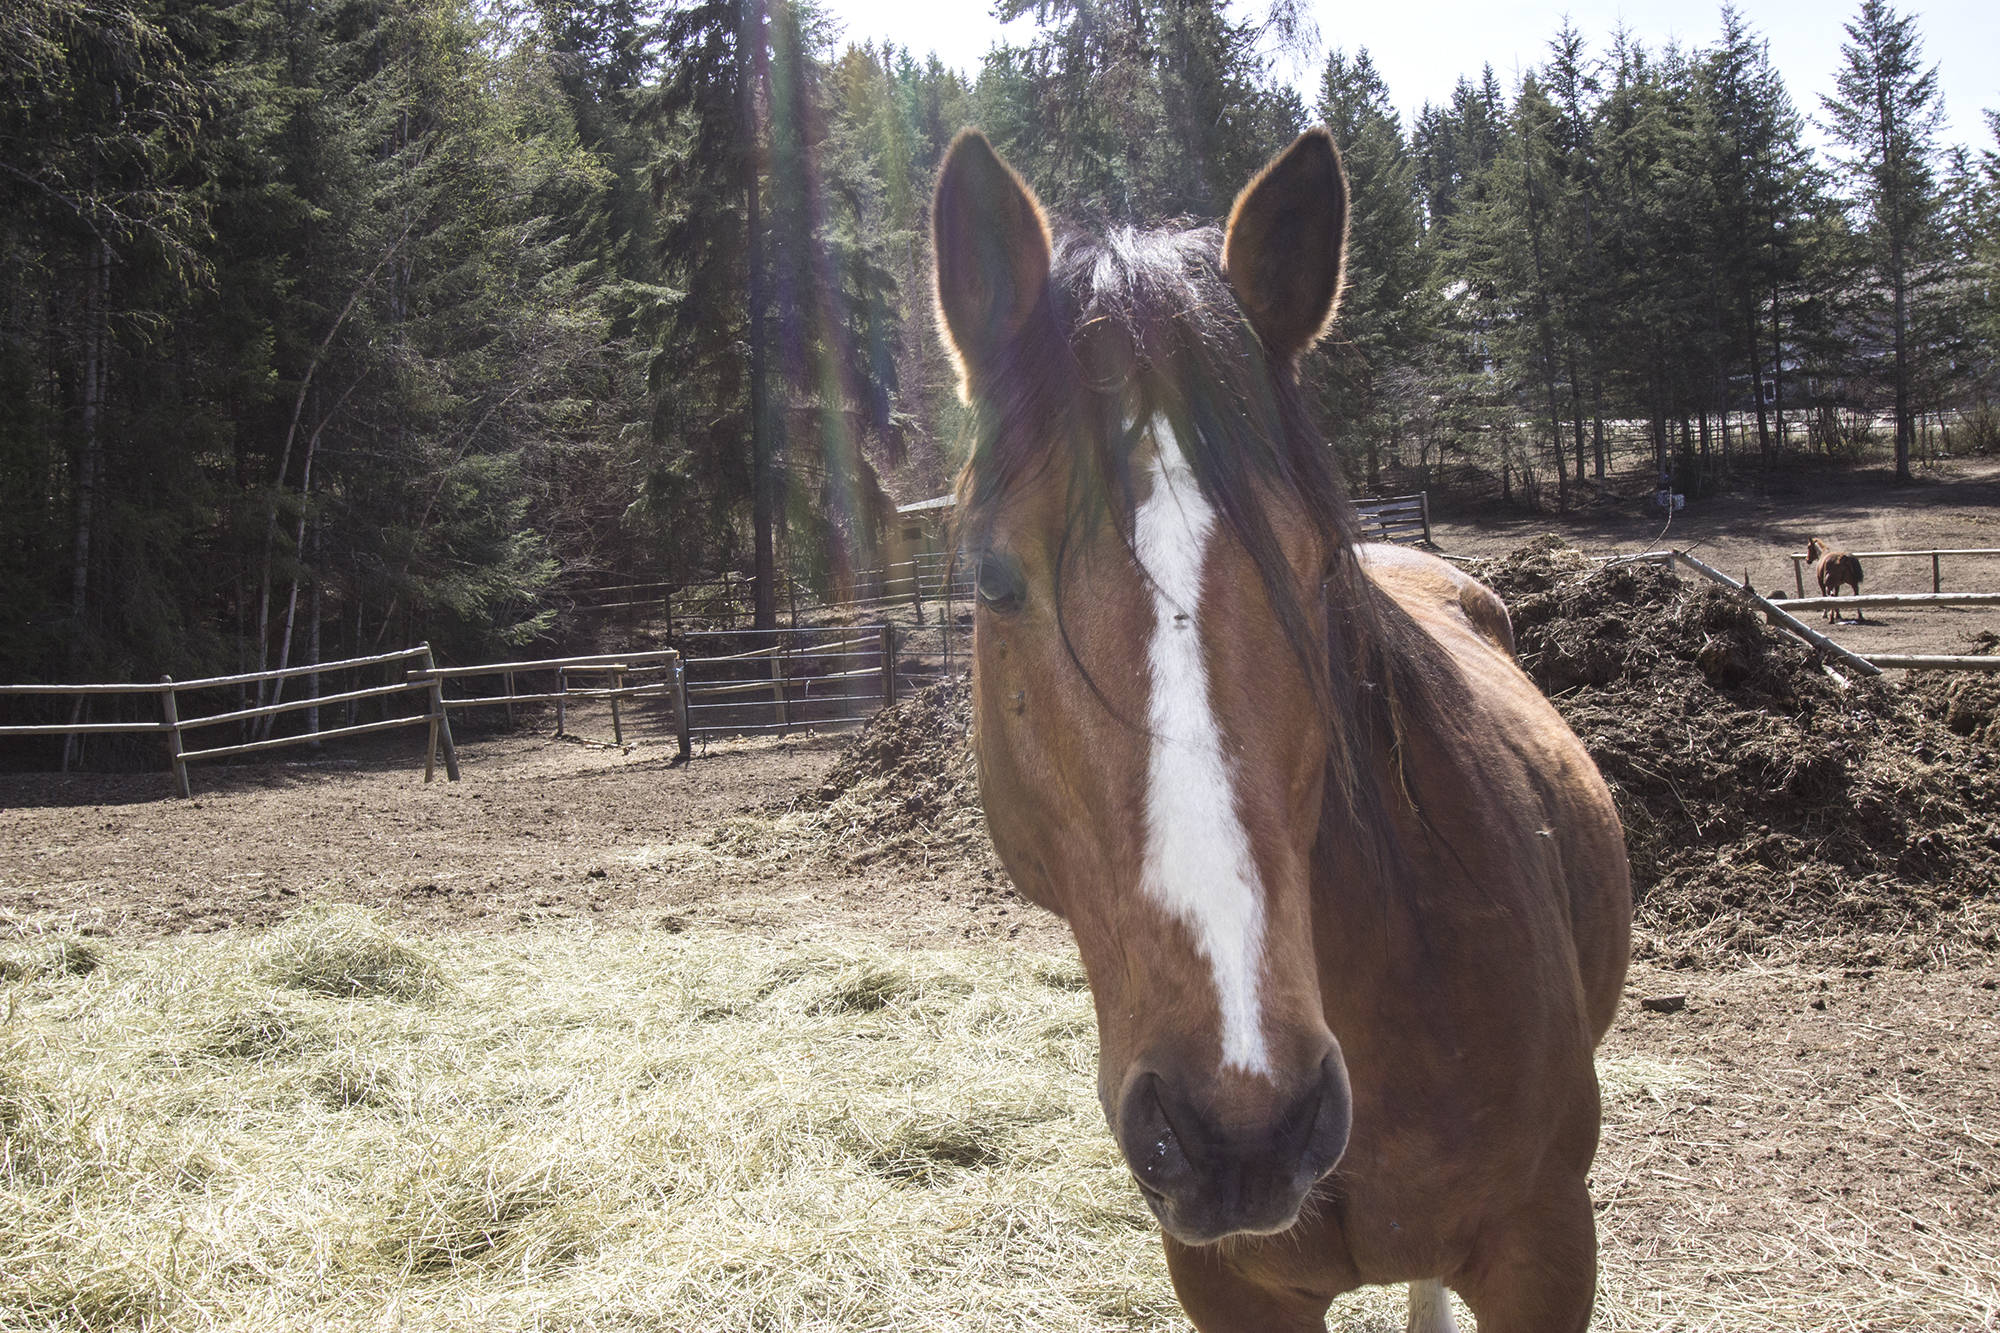 While many of the horses taken in by the Horse Angels come to them wild, by the end of their training they are friendly, inquisitive animals that love human attention. Such is the case with Socks, one of over 30 horses up for adoption through the organization. (Jodi Brak/Salmon Arm Observer)